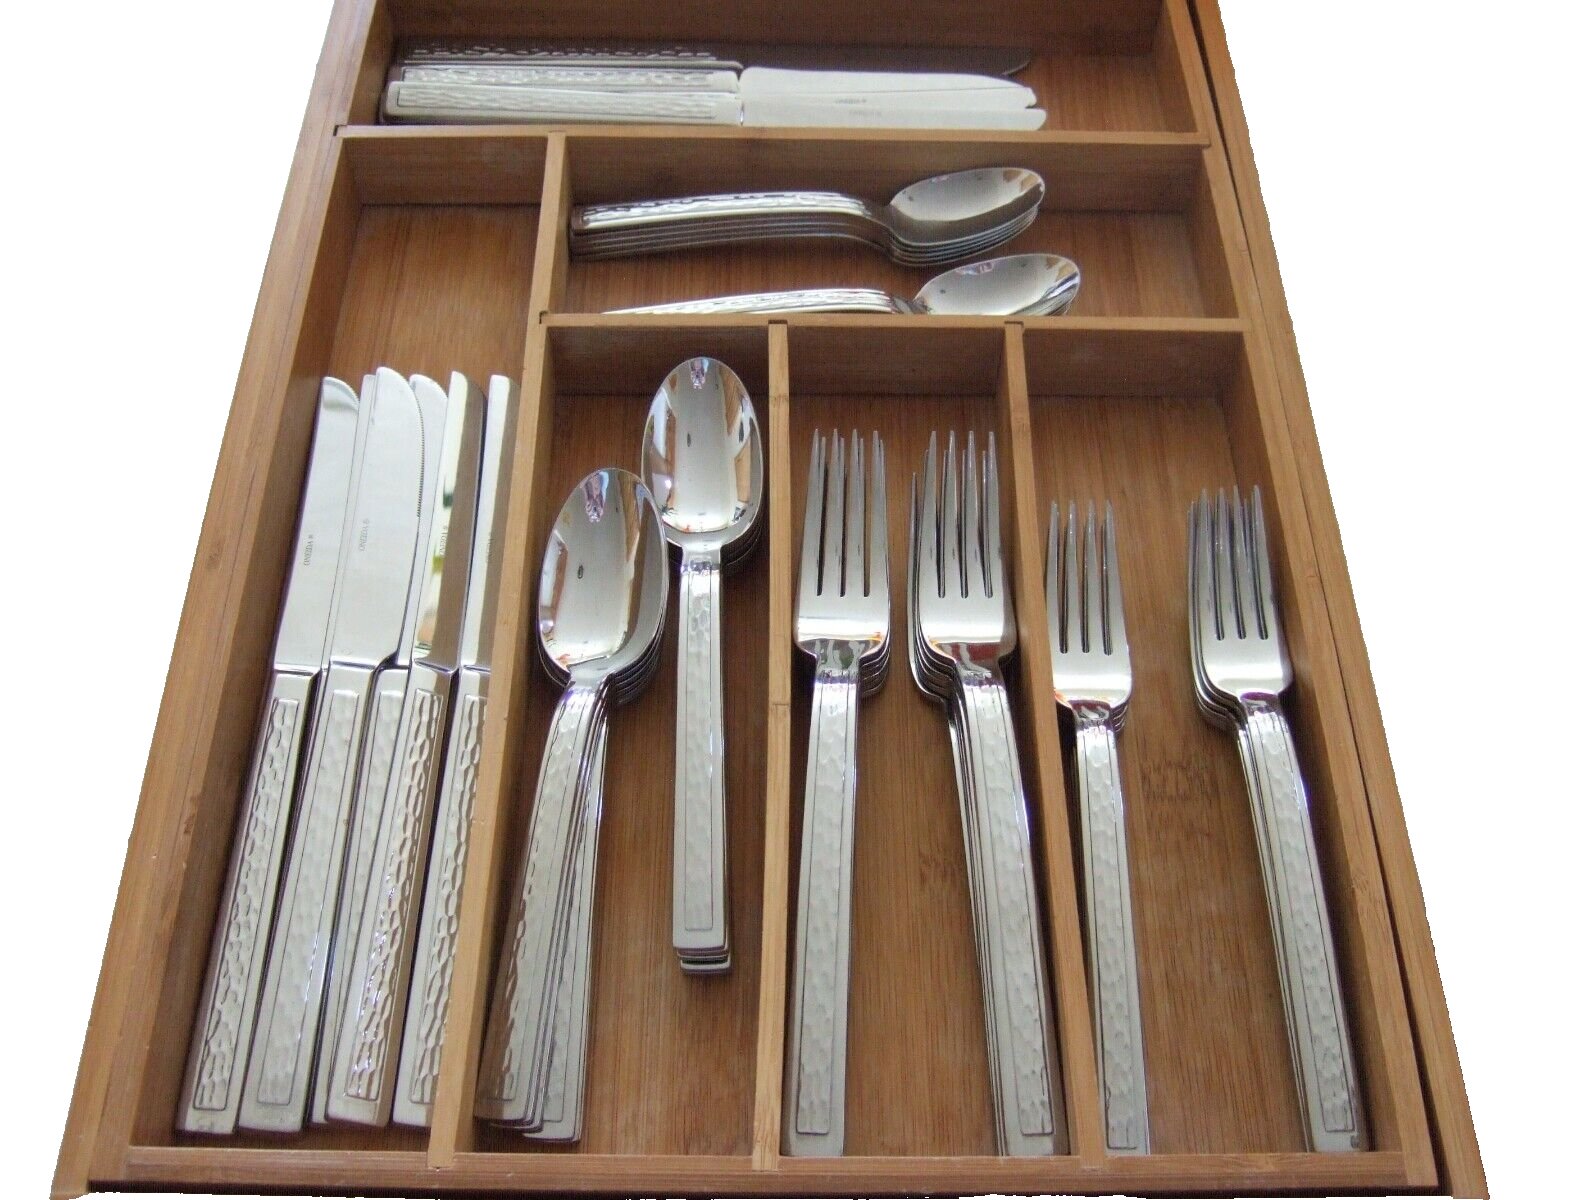 RARE 60 Pc SET COMPLETE SVC FOR 12 ONEIDA OHS504 STAINLESS TEXTURED FLATWARE - $162.00